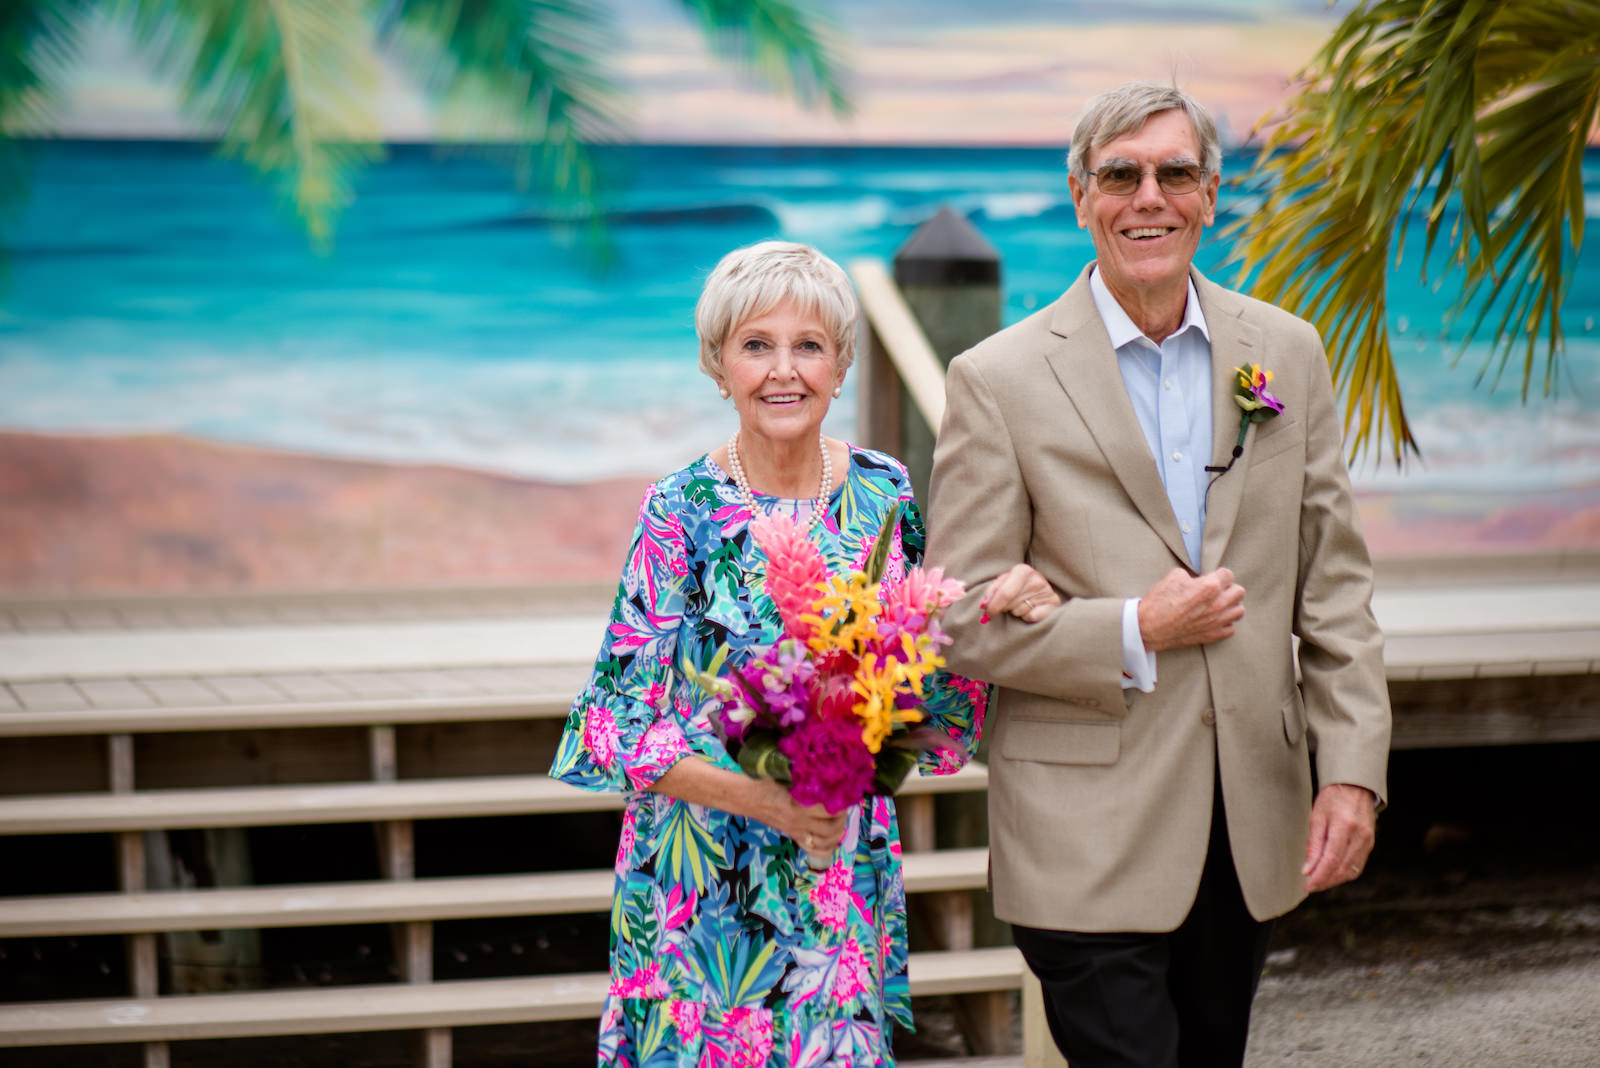 Tropical Inspired Florida Vow Renewal, Husband and Wife Walk Down Aisle At Milestone Anniversary Vow Renewal, Bride Wearing Lilly Pulitzer Dress, Carrying Vibrant Exotic Floral Bouquet with Pink, Purple and Yellow Flowers | Tampa Bay Vow Renewal and Microwedding Planners Perfecting The Plan | St. Petersburg Wedding Venue Isla Del Sol